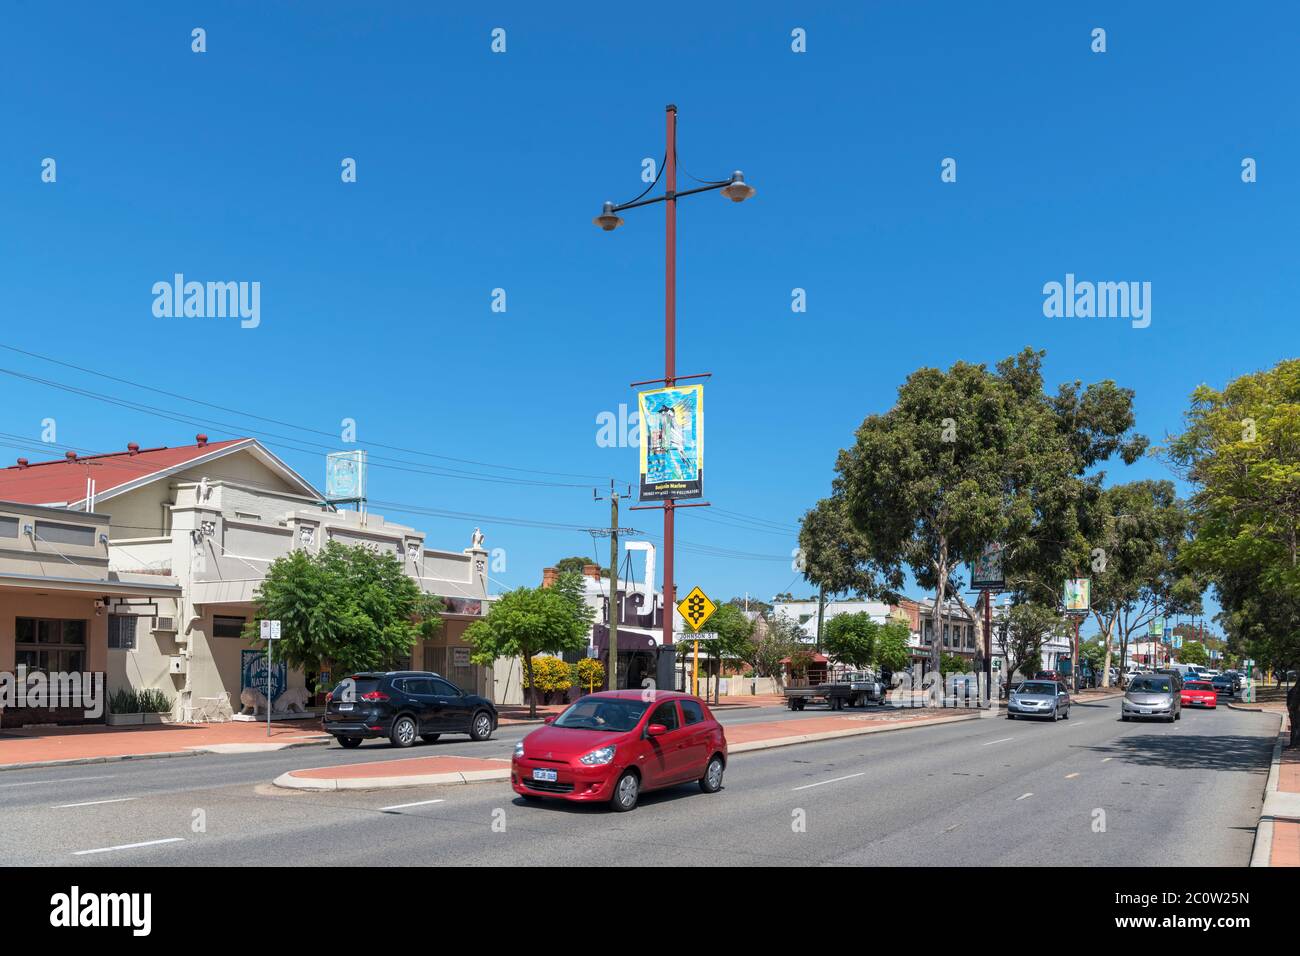 James Street (The Great Eastern Highway) in the town of Guildford, Swan Valley, Perth, Western Australia, Australia Stock Photo